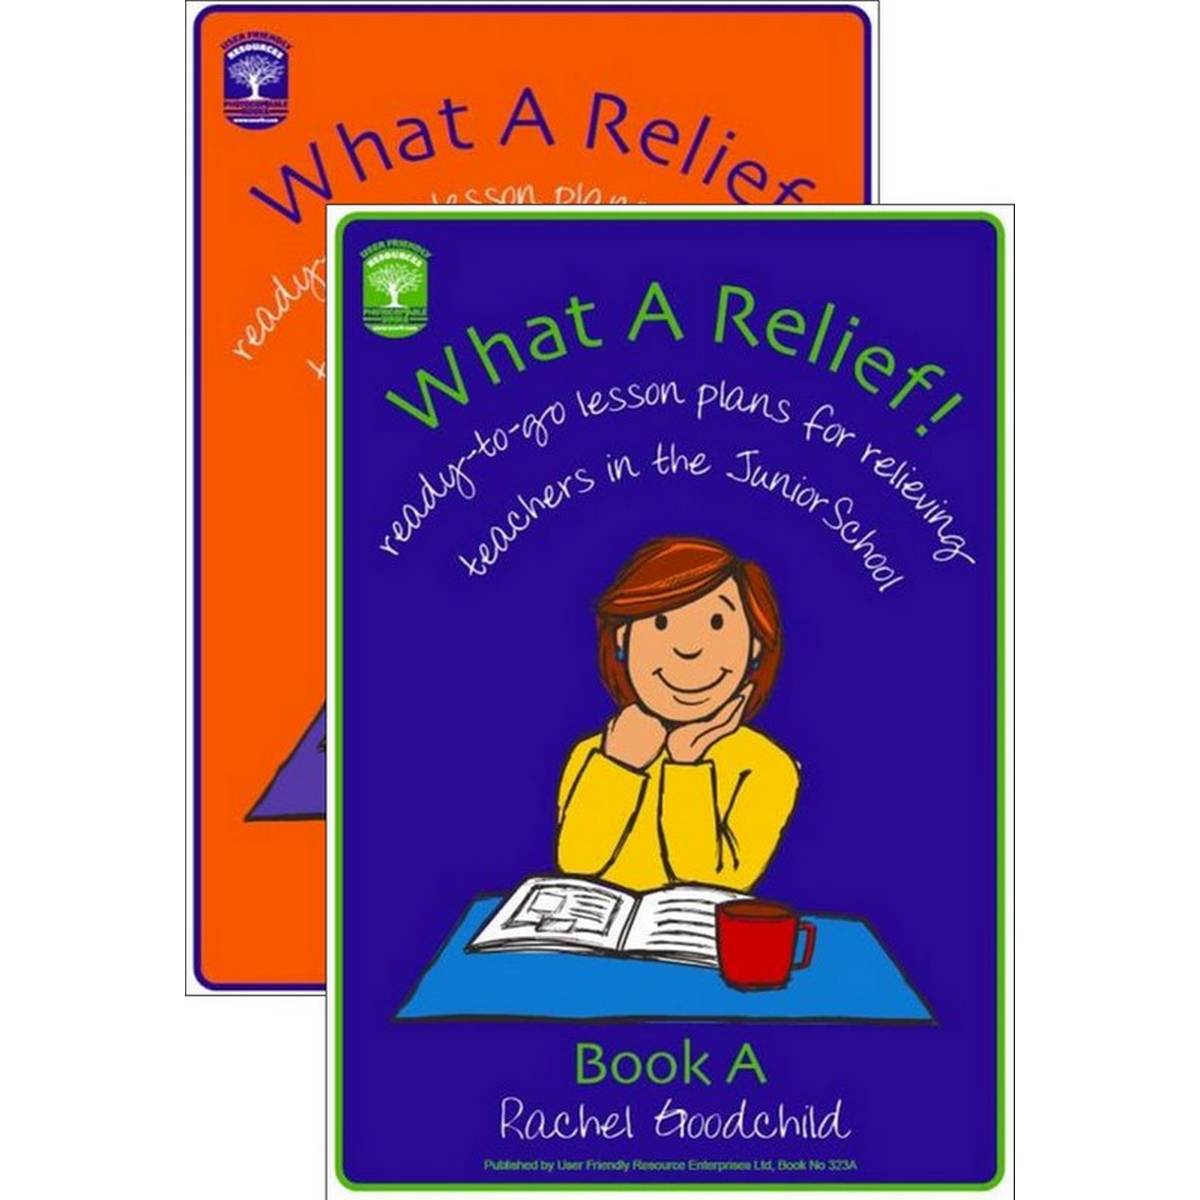 What a Relief! Set (Book A & Book B) - Ready-to-go Lesson Plans for Relieving Teachers in the Junior School